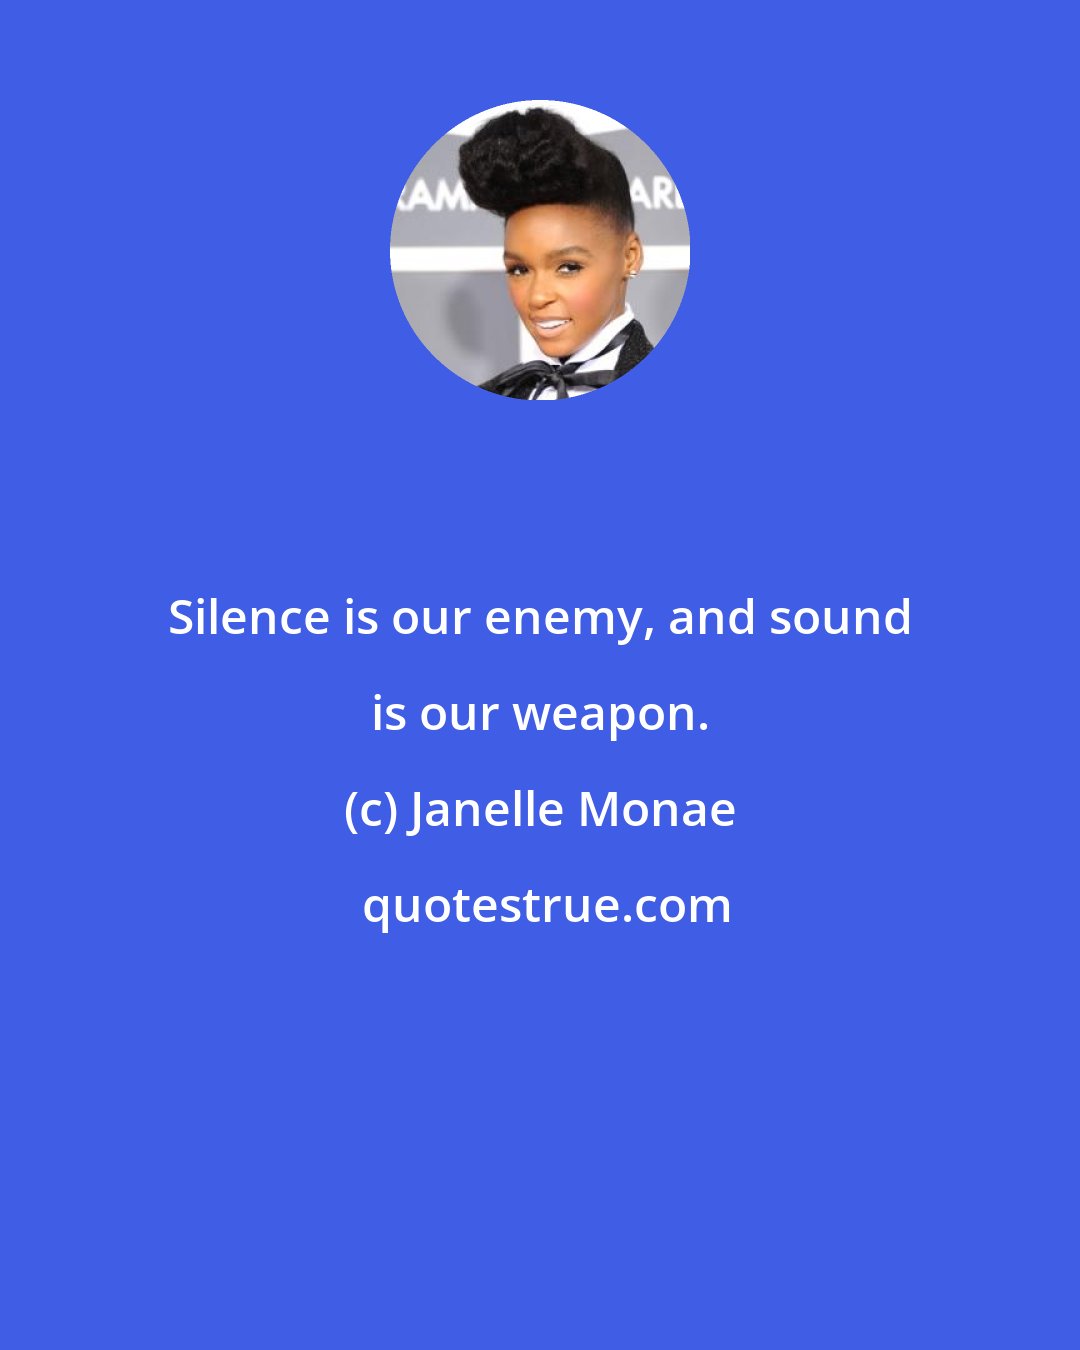 Janelle Monae: Silence is our enemy, and sound is our weapon.